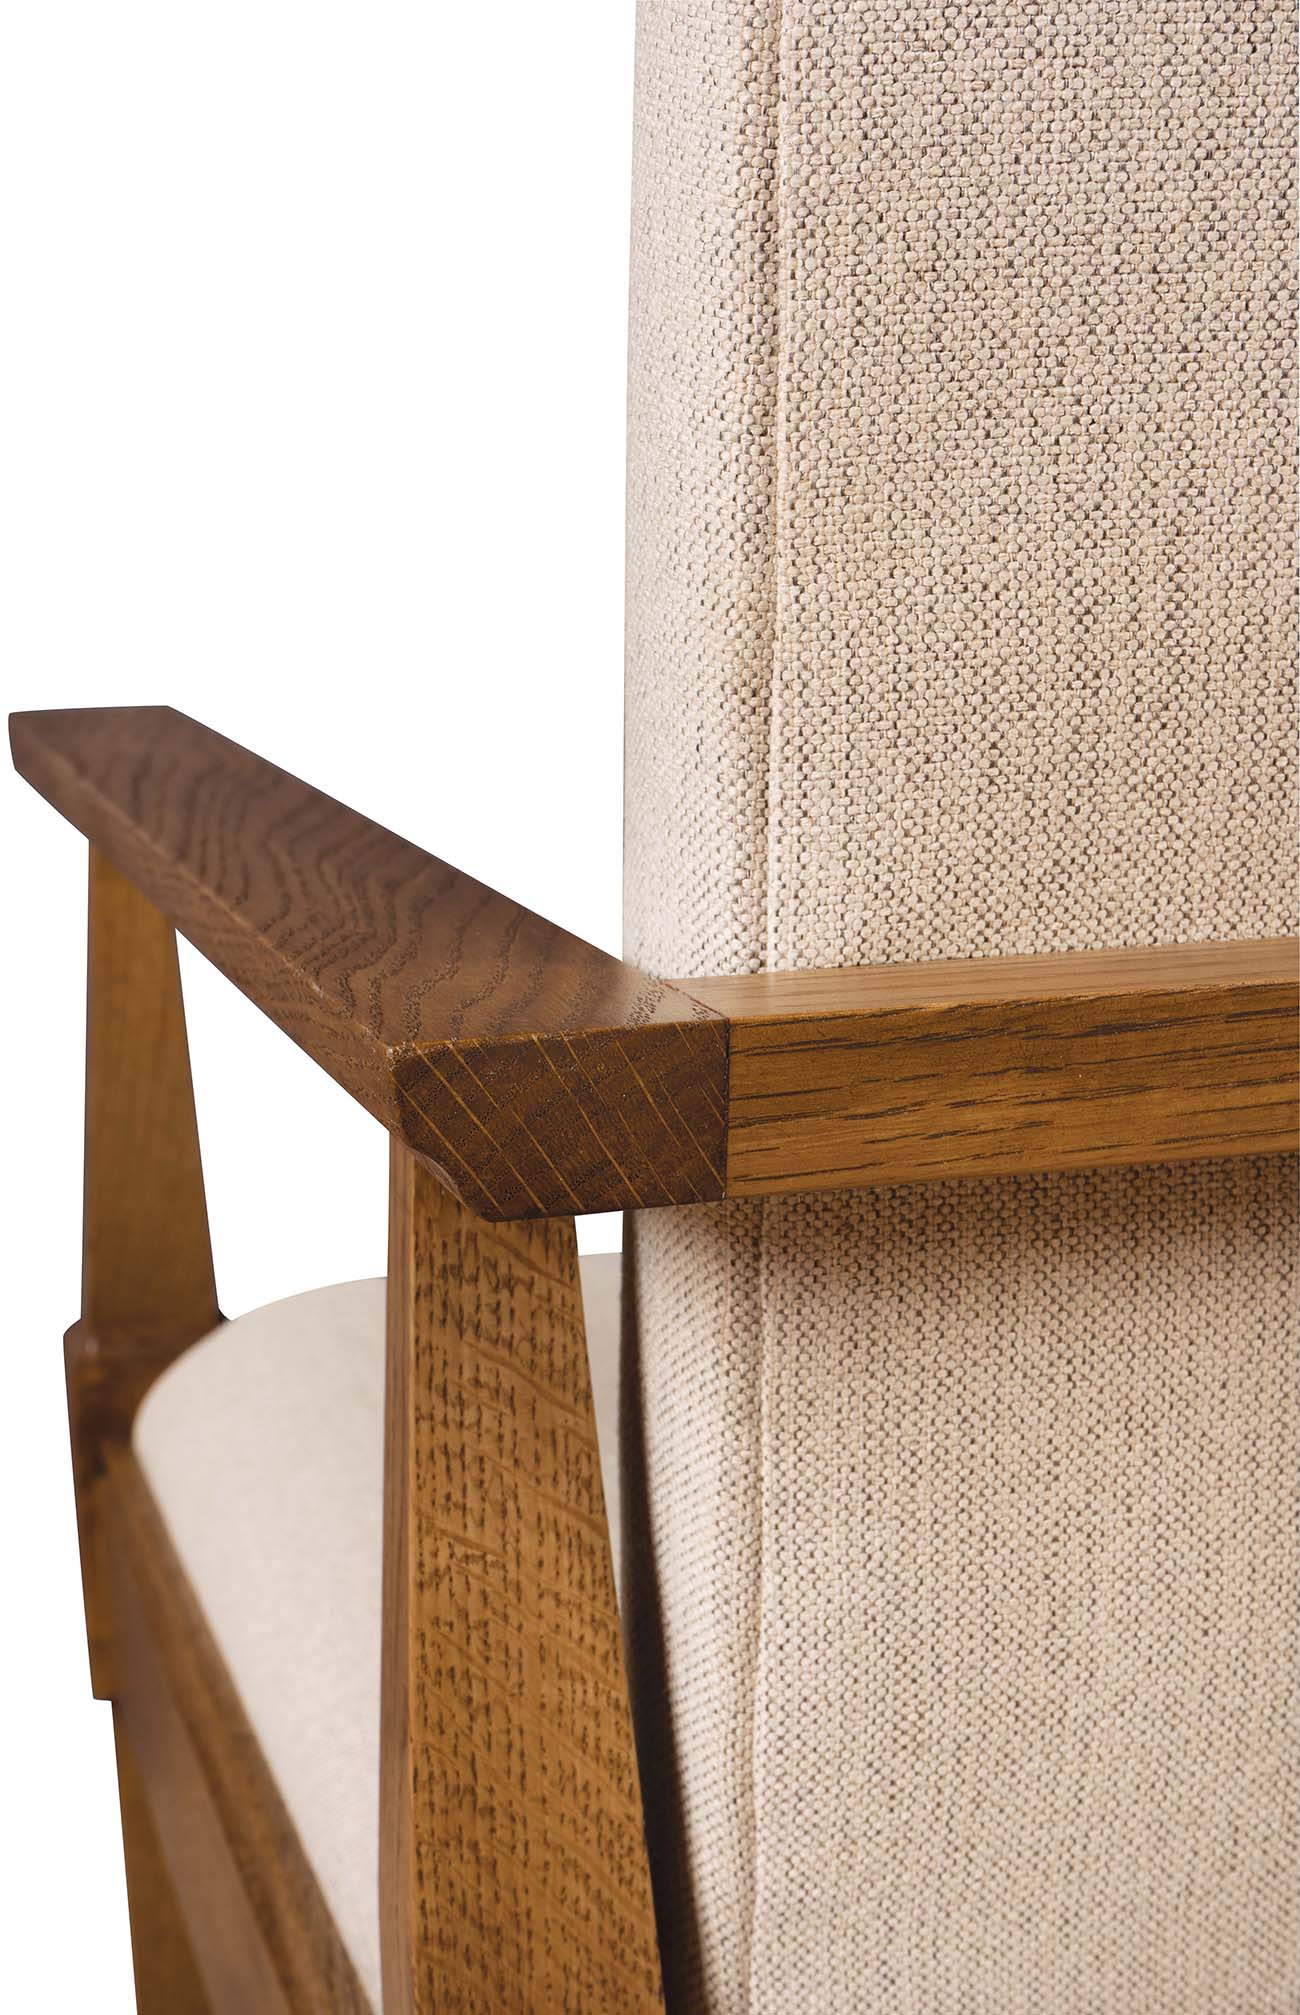 St. Lawrence Hostess Chair - Stickley Brand